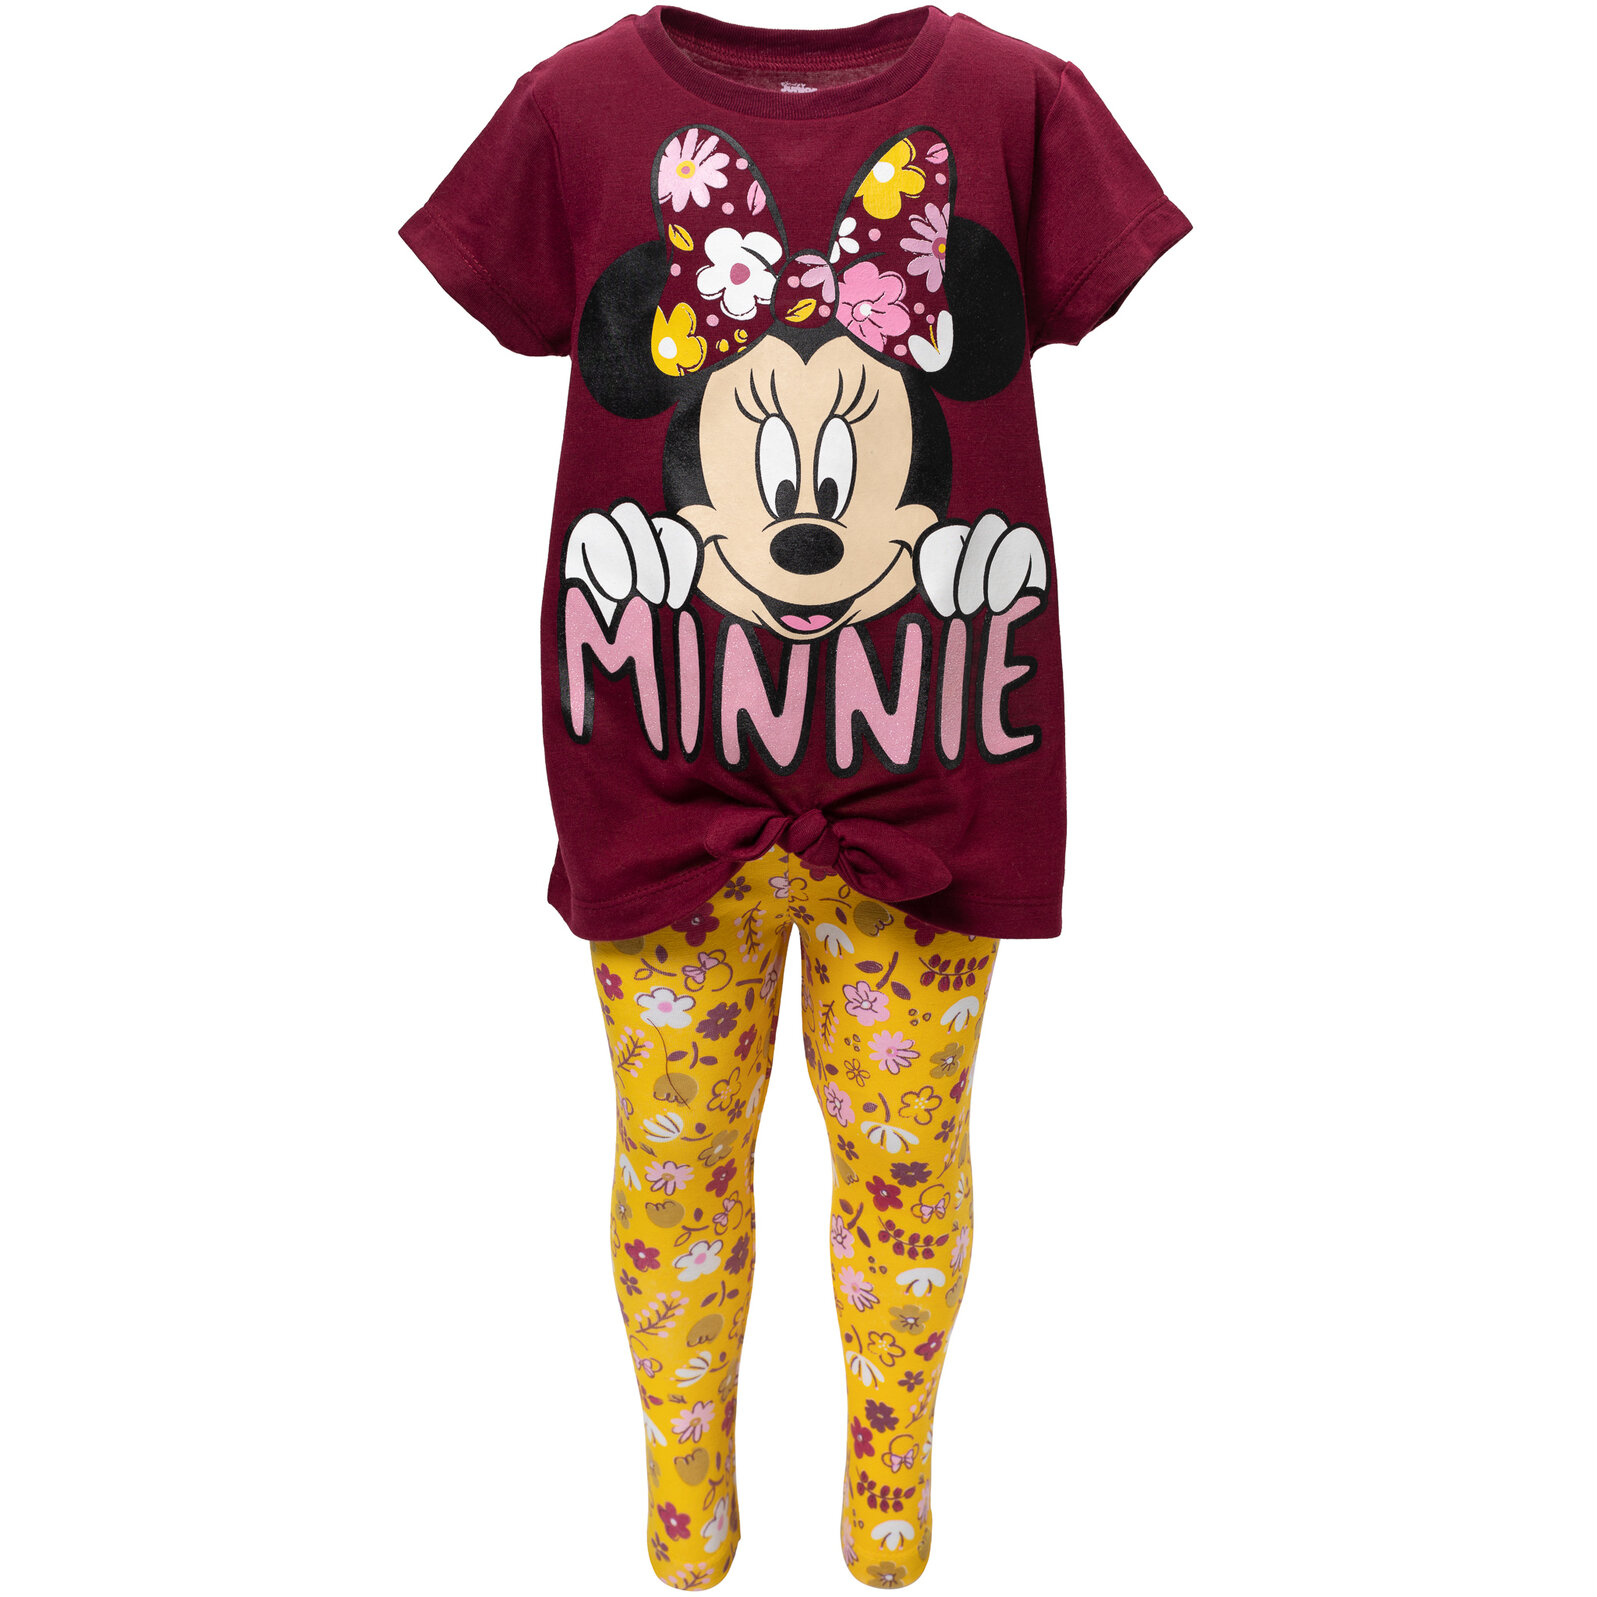 Disney Minnie Mouse Little Girls T-Shirt and Leggings Outfit Set Infant to Little Kid - image 3 of 5